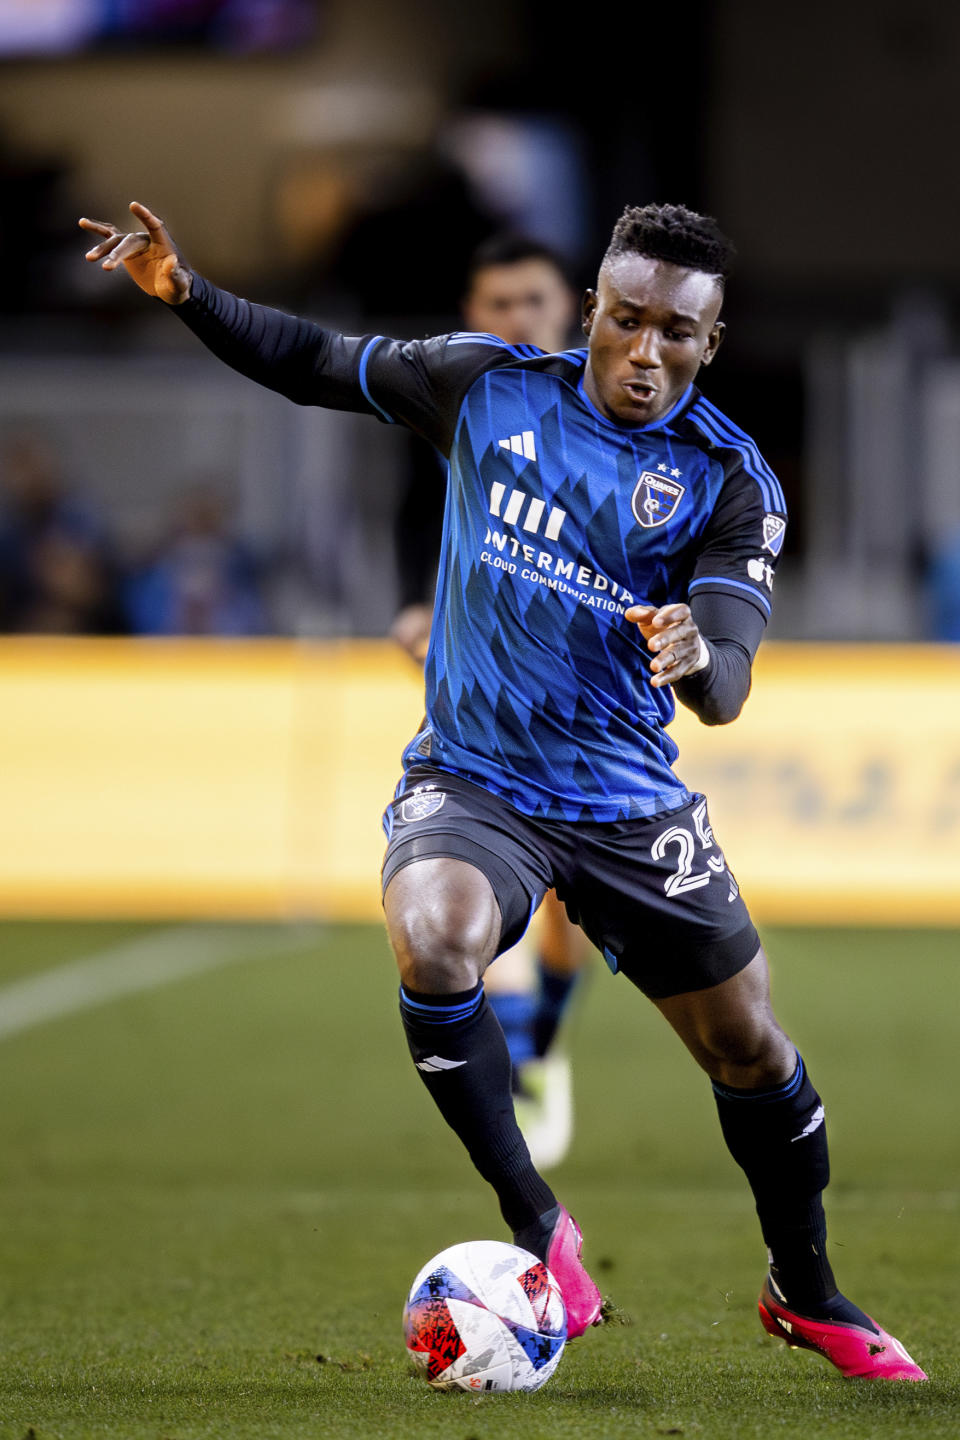 FILE - San Jose Earthquakes forward Ousseni Bouda controls the ball during the second half of an MLS soccer match against the Portland Timbers in San Jose, Calif., Saturday, June 17, 2023. half of an MLS soccer match Saturday, March 18, 2023, in St. Louis. Bouda arrived at the Right to Dream academy not knowing the language and with no guarantees he’d be accepted into the residential development program and school. But the youngster showed talent and won a spot. Now, Right to Dream is coming to the United States as the academy under San Diego FC, which will join MLS as the league’s 30th team in 2025. (AP Photo/John Hefti, File)